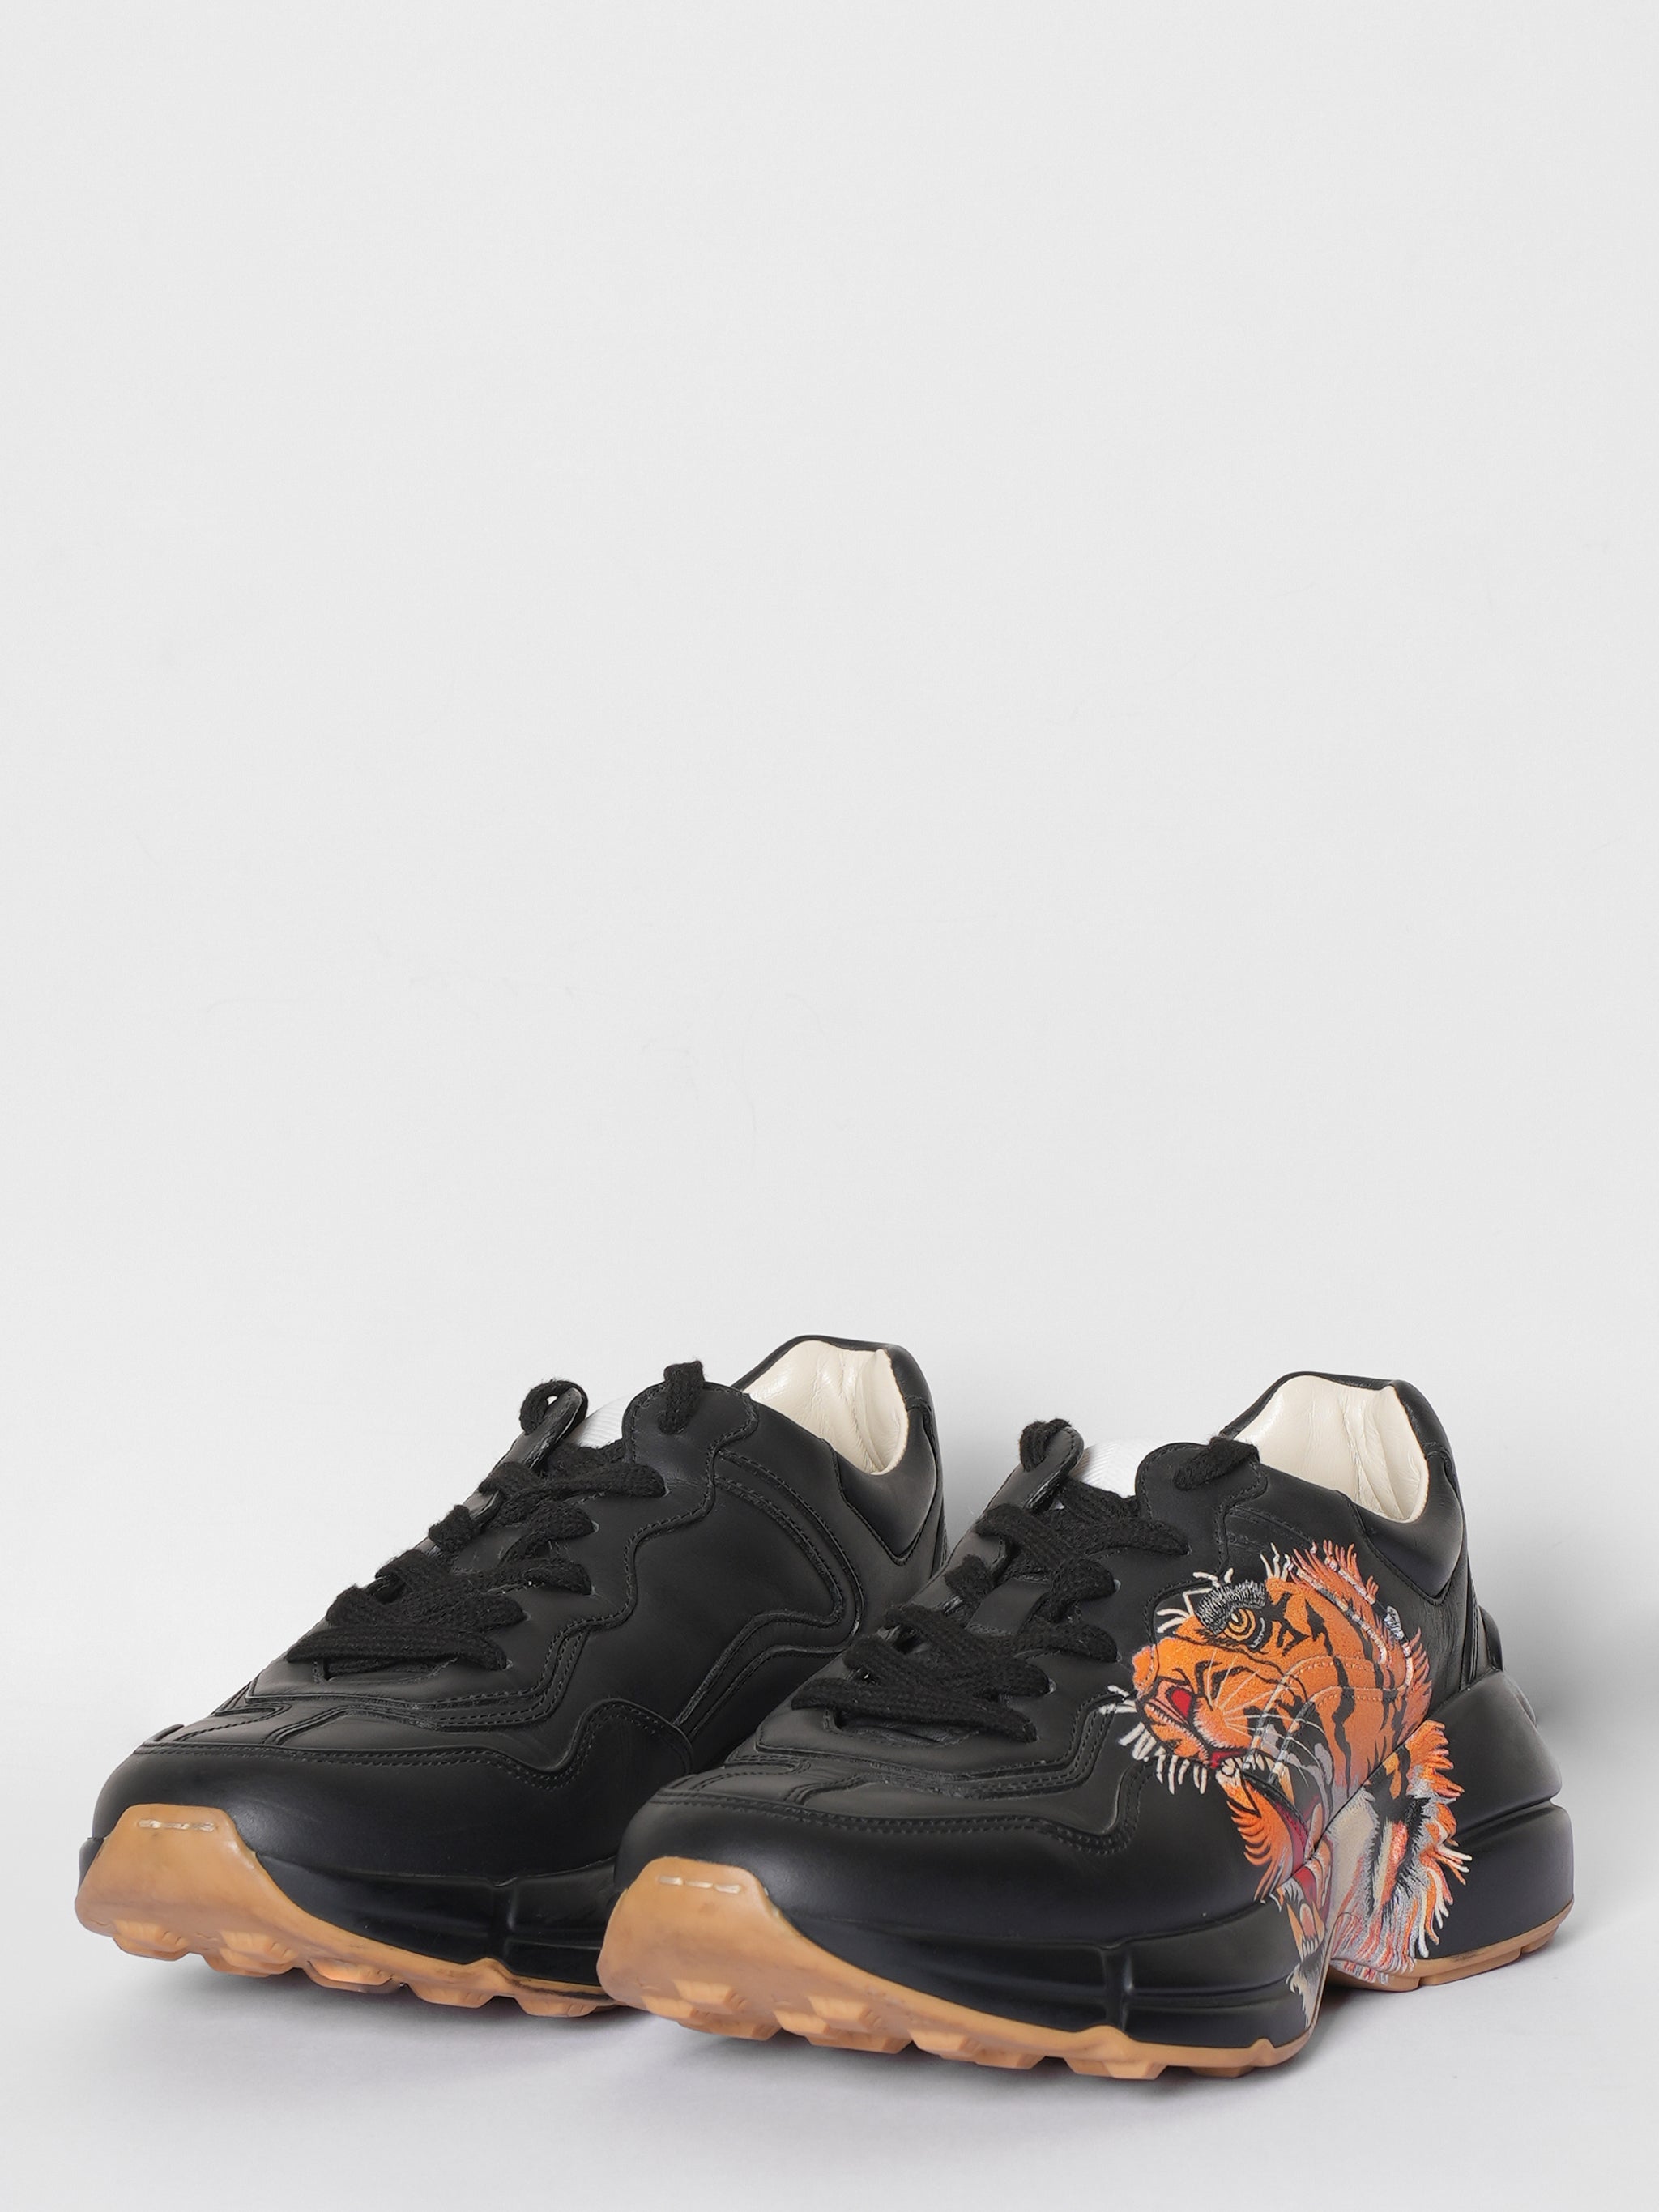 Gucci Black Leather Tiger Ryton Trainers